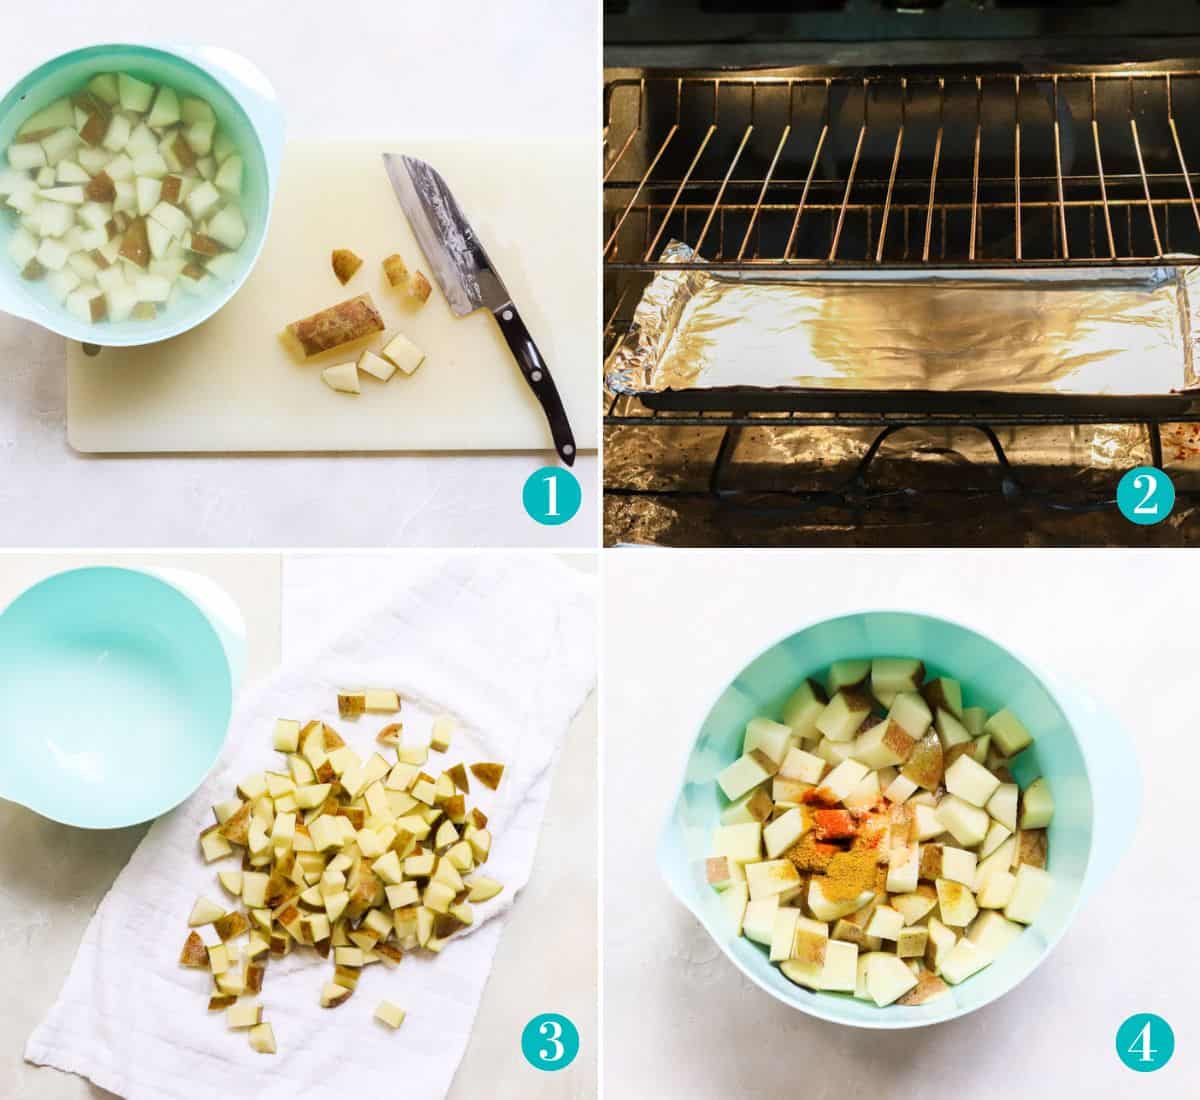 four photo collage with potatoes being chopped and put into a bowl of hot water, a baking sheet preheating in the oven, chopped potatoes being dried on a dish towel, and potatoes covered in spices in a mixing bowl.